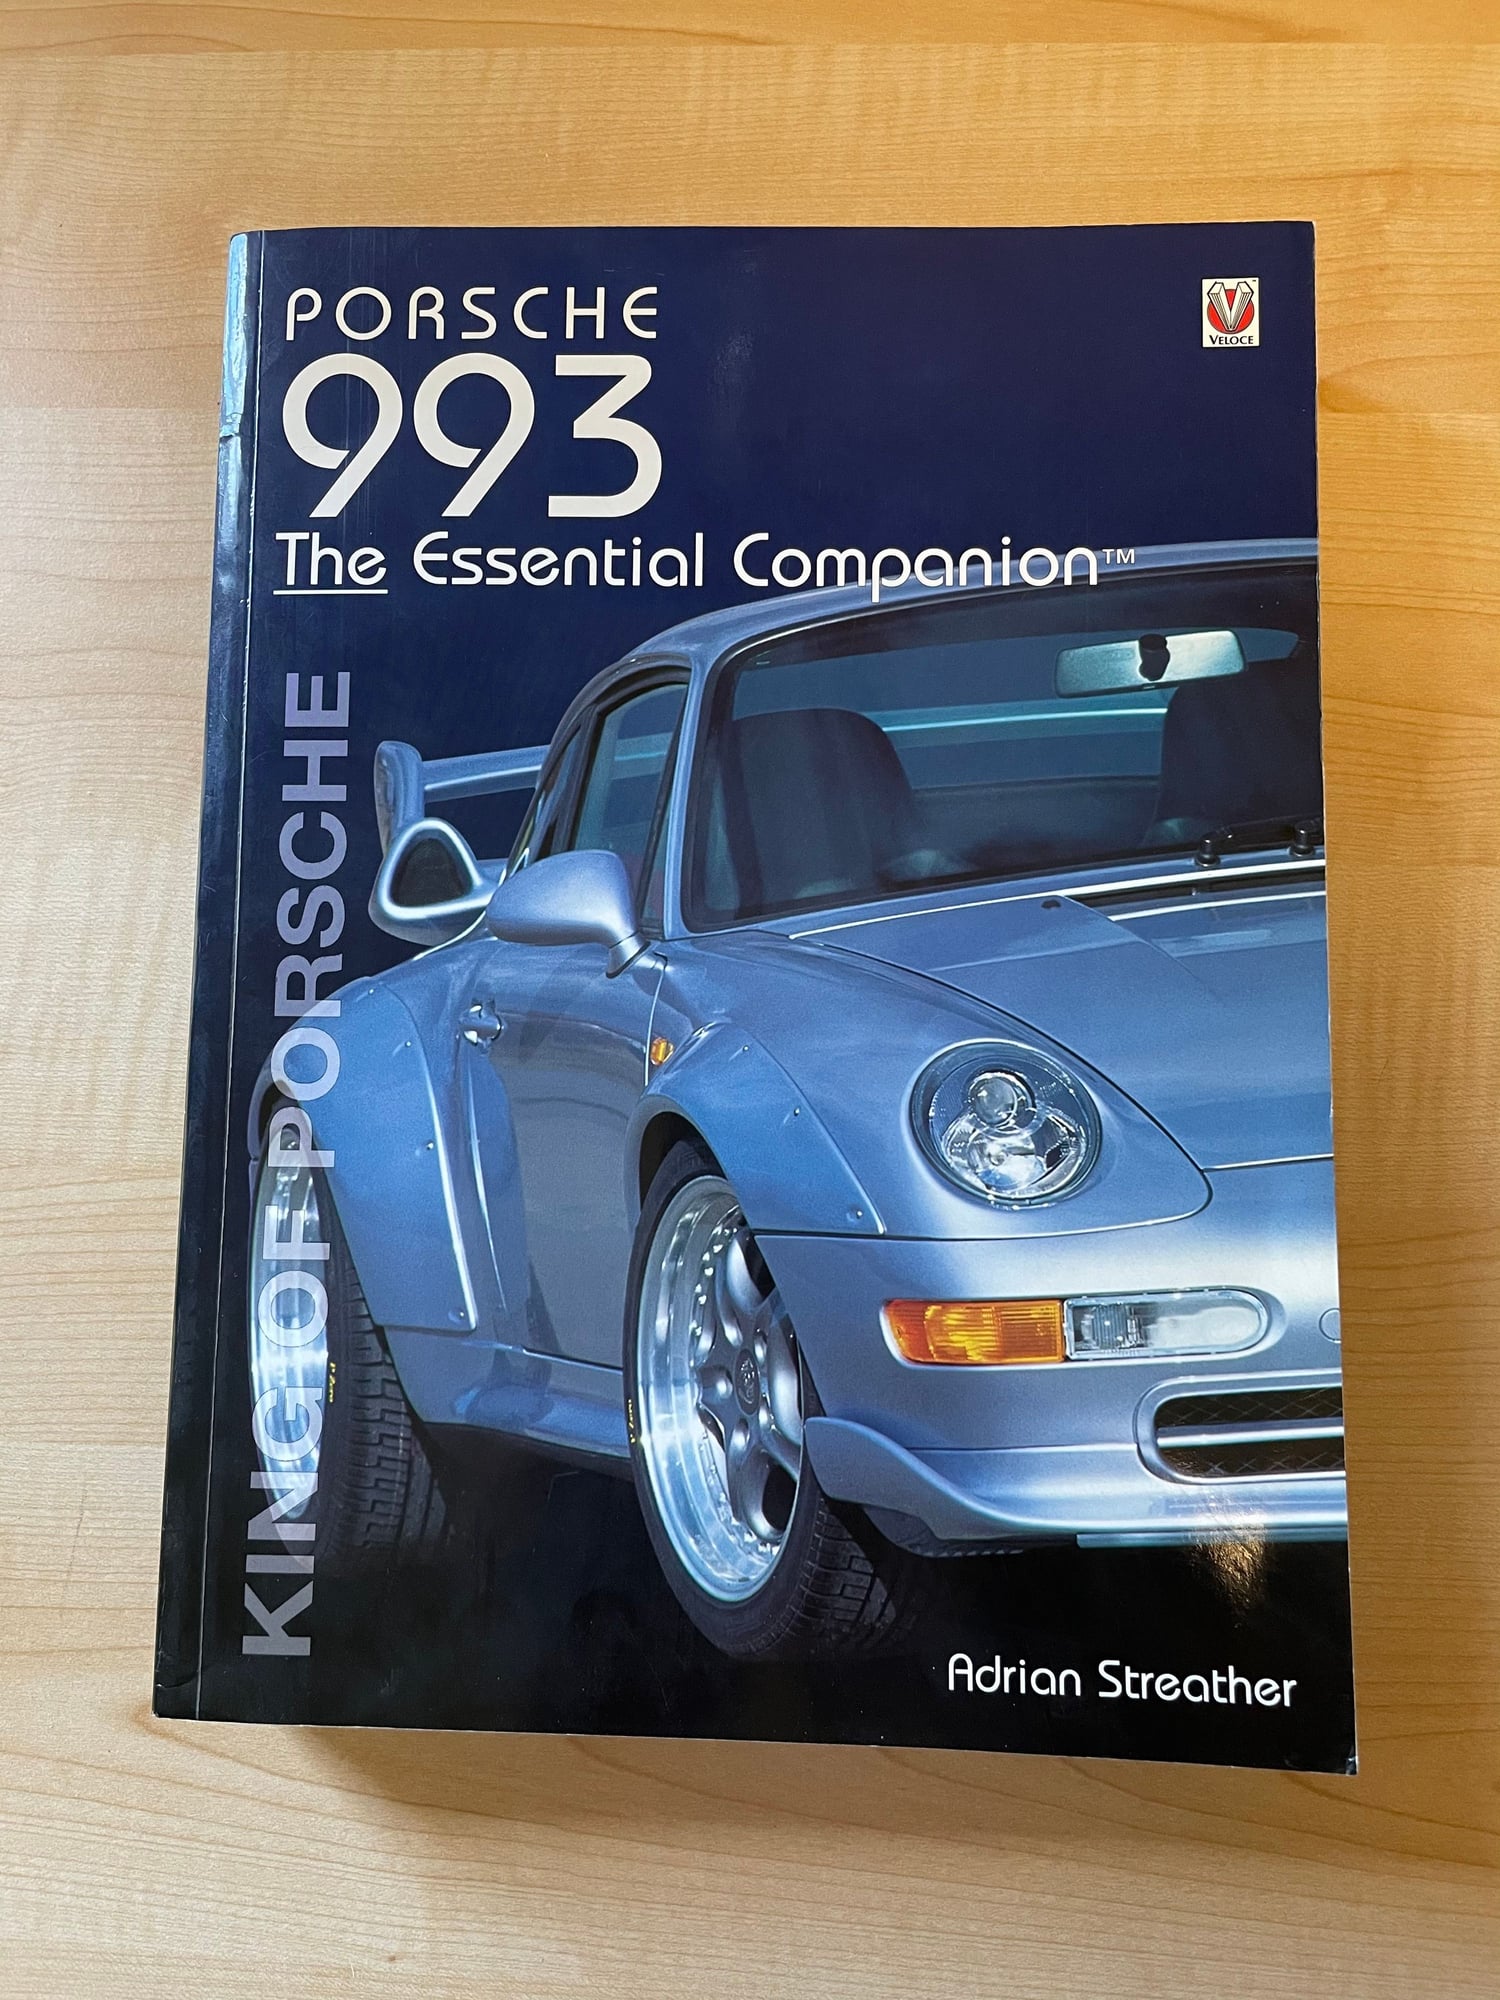 Miscellaneous - "Porsche 993 - The Essential Companion" Book - Used - All Years Any Make All Models - 90212, CA 90212, United States